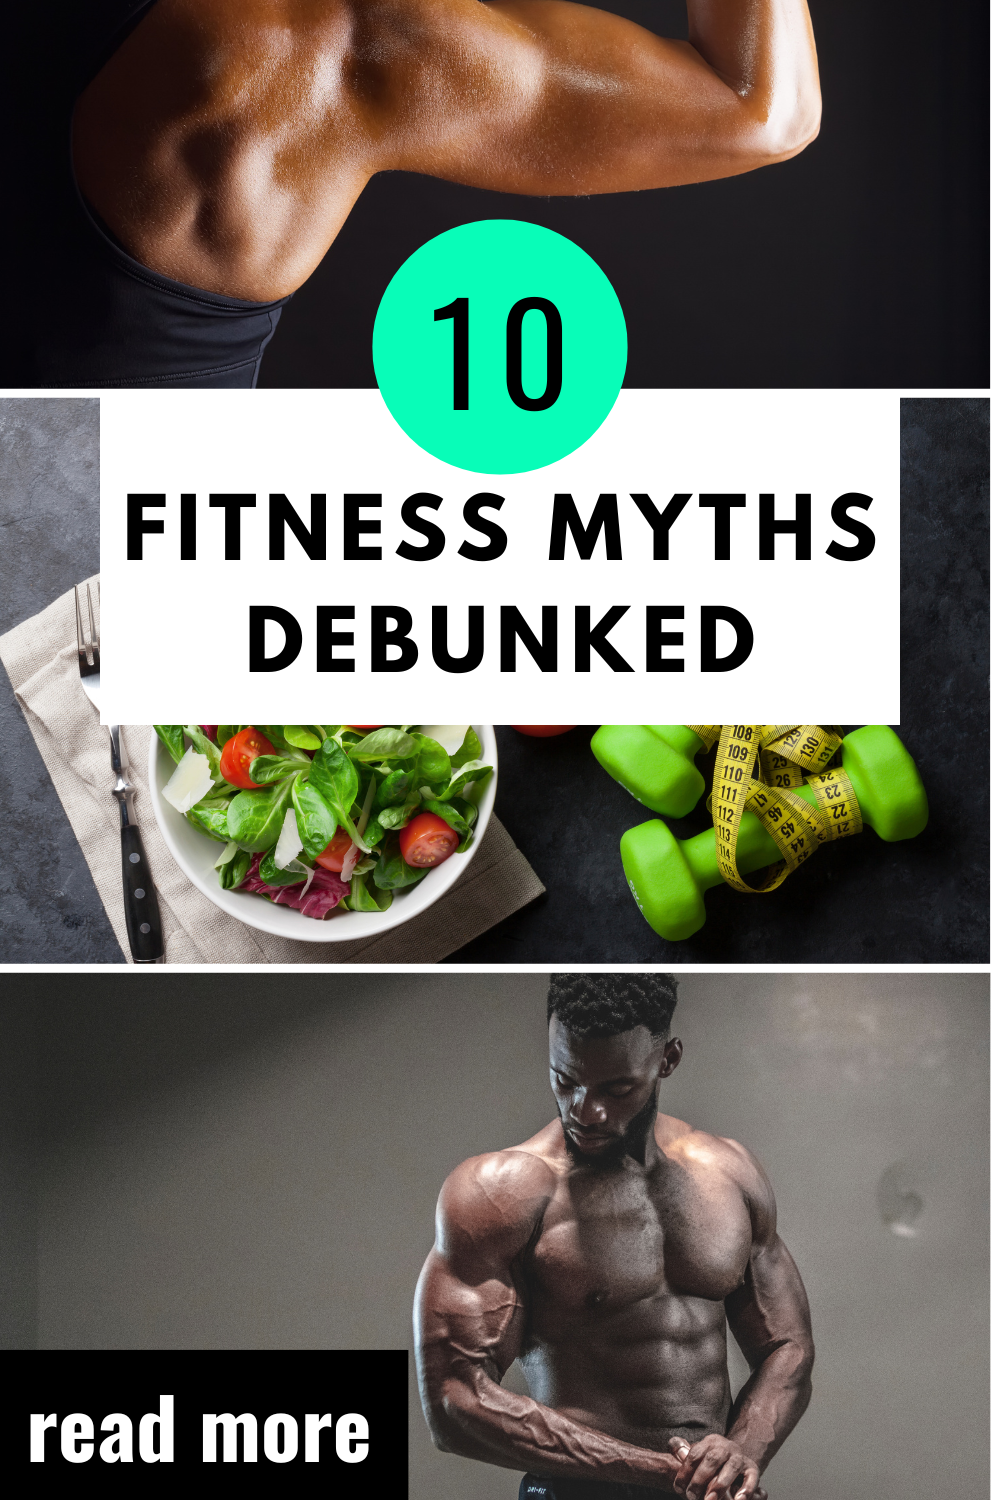 15 Simplistic Myths About Exercise, Debunked